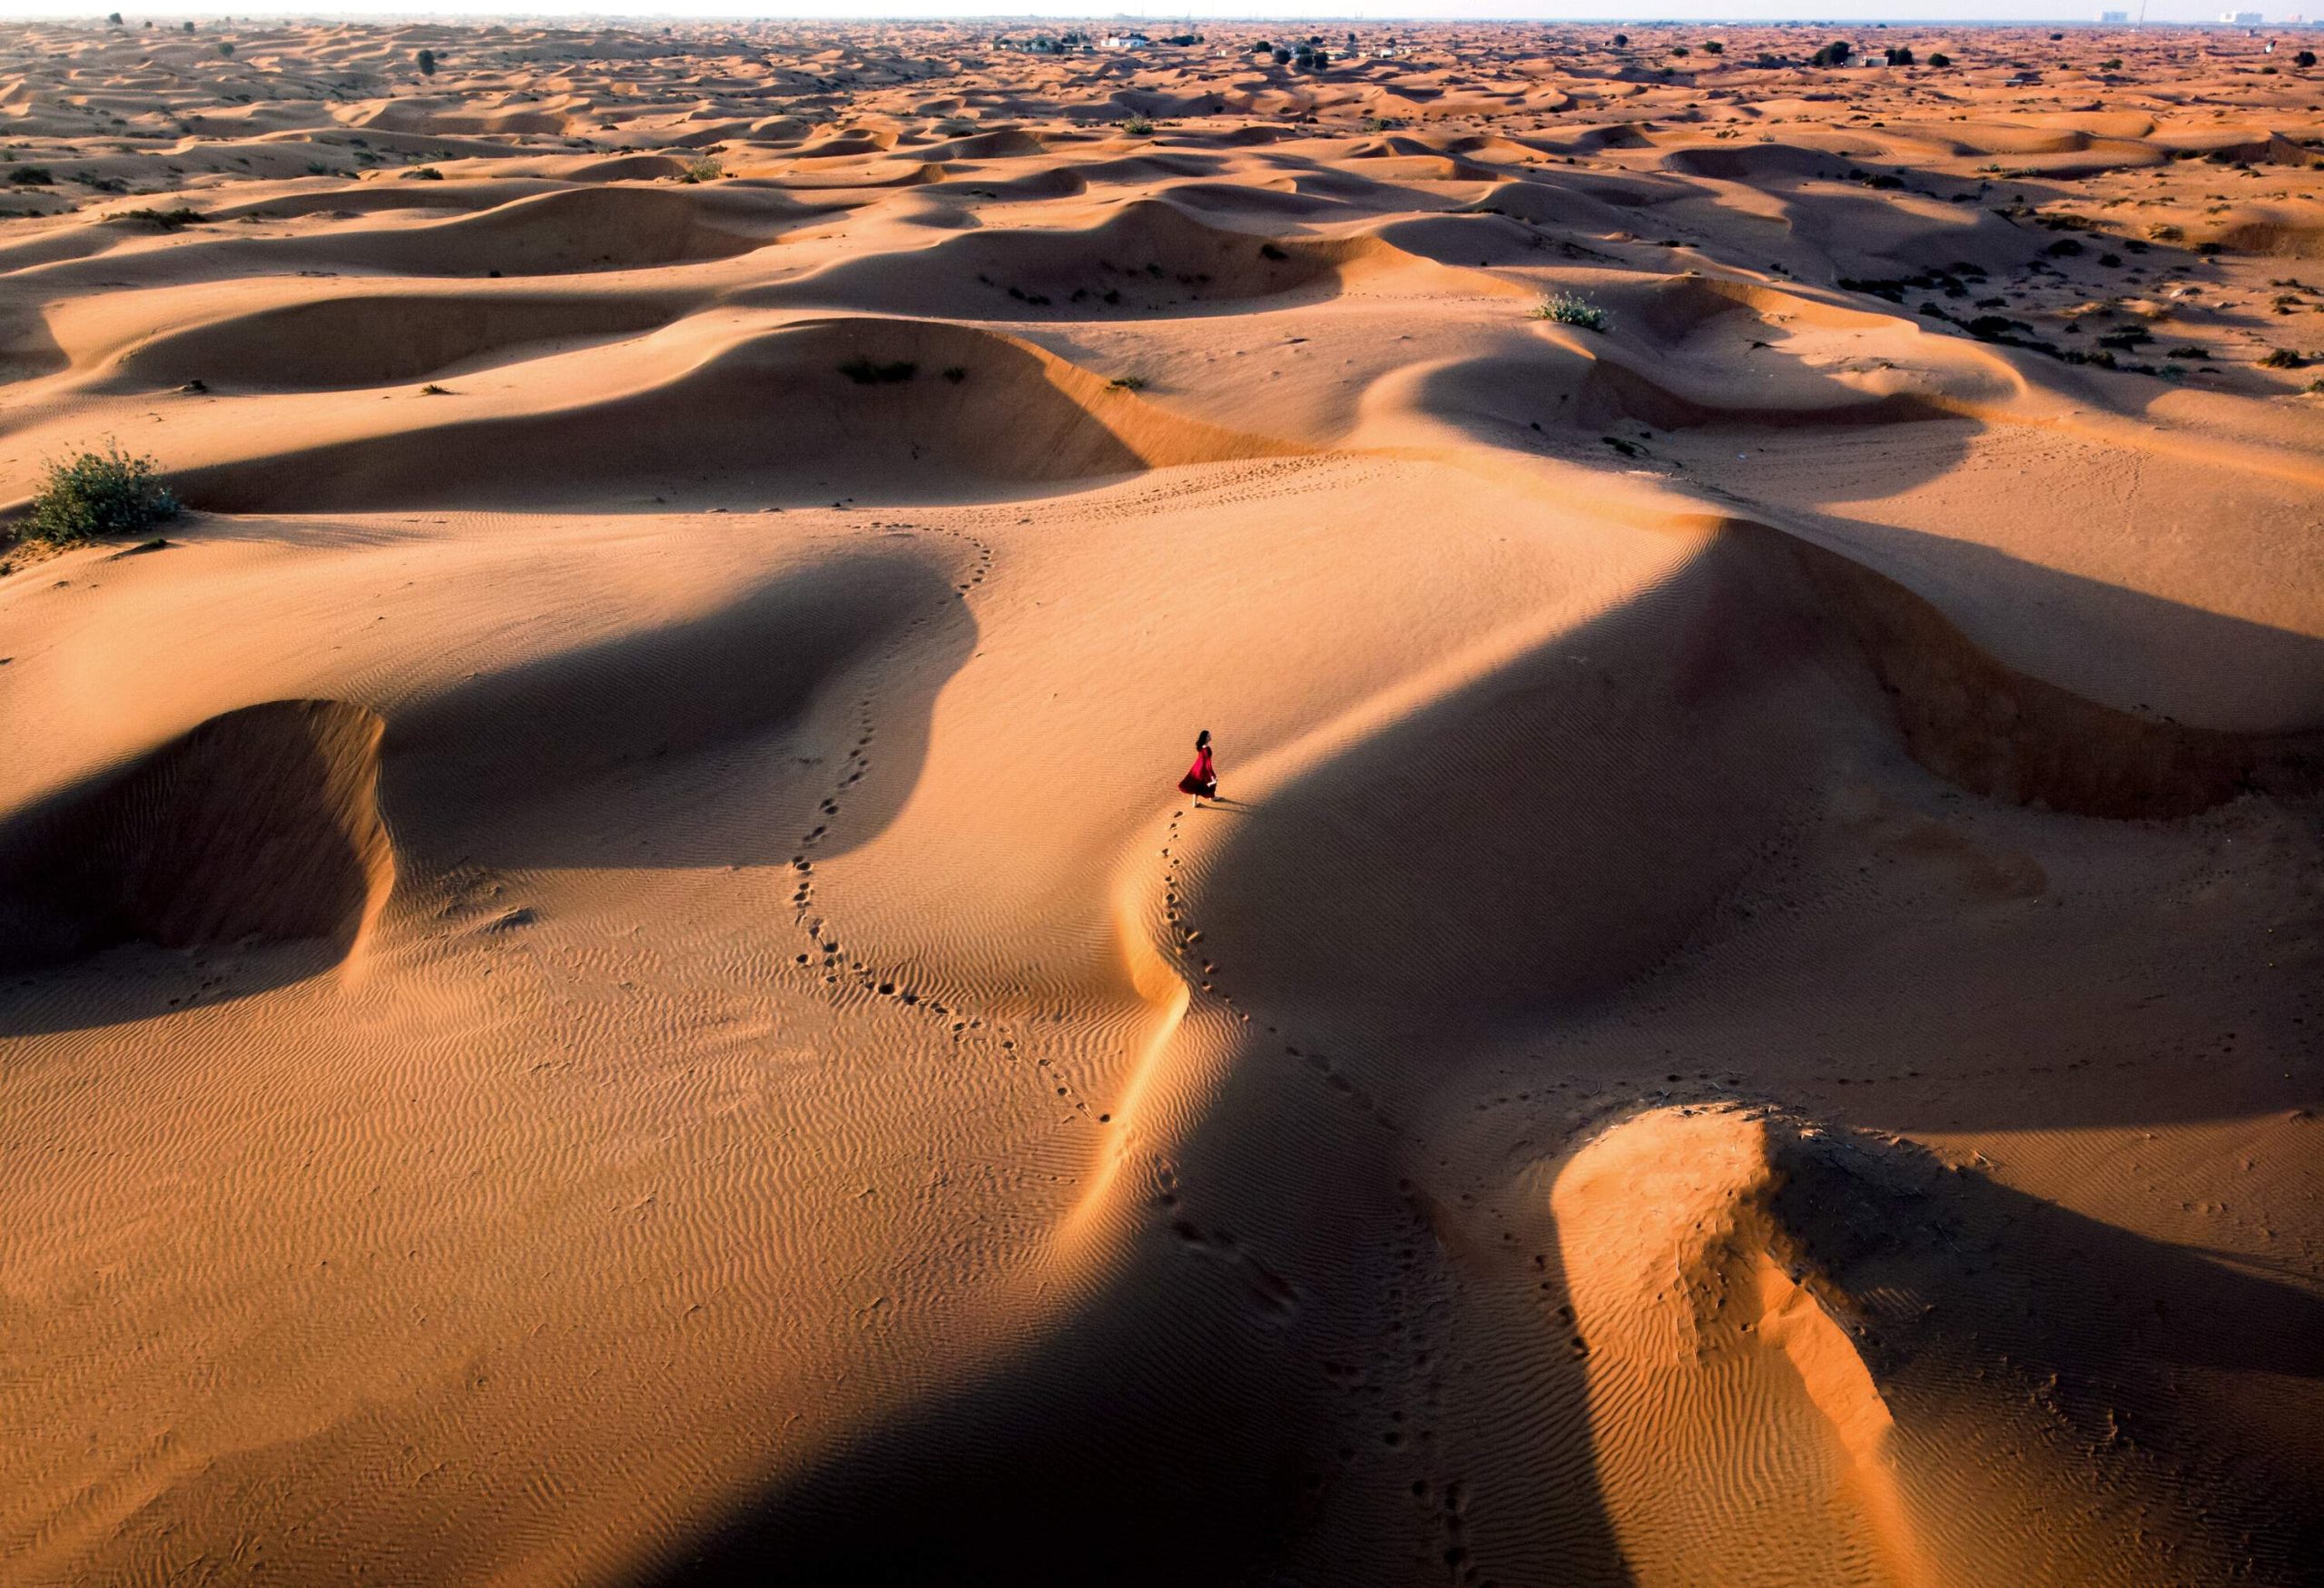 A woman in a dress walks in the middle of the desert, leaving her footprints on the dunes.